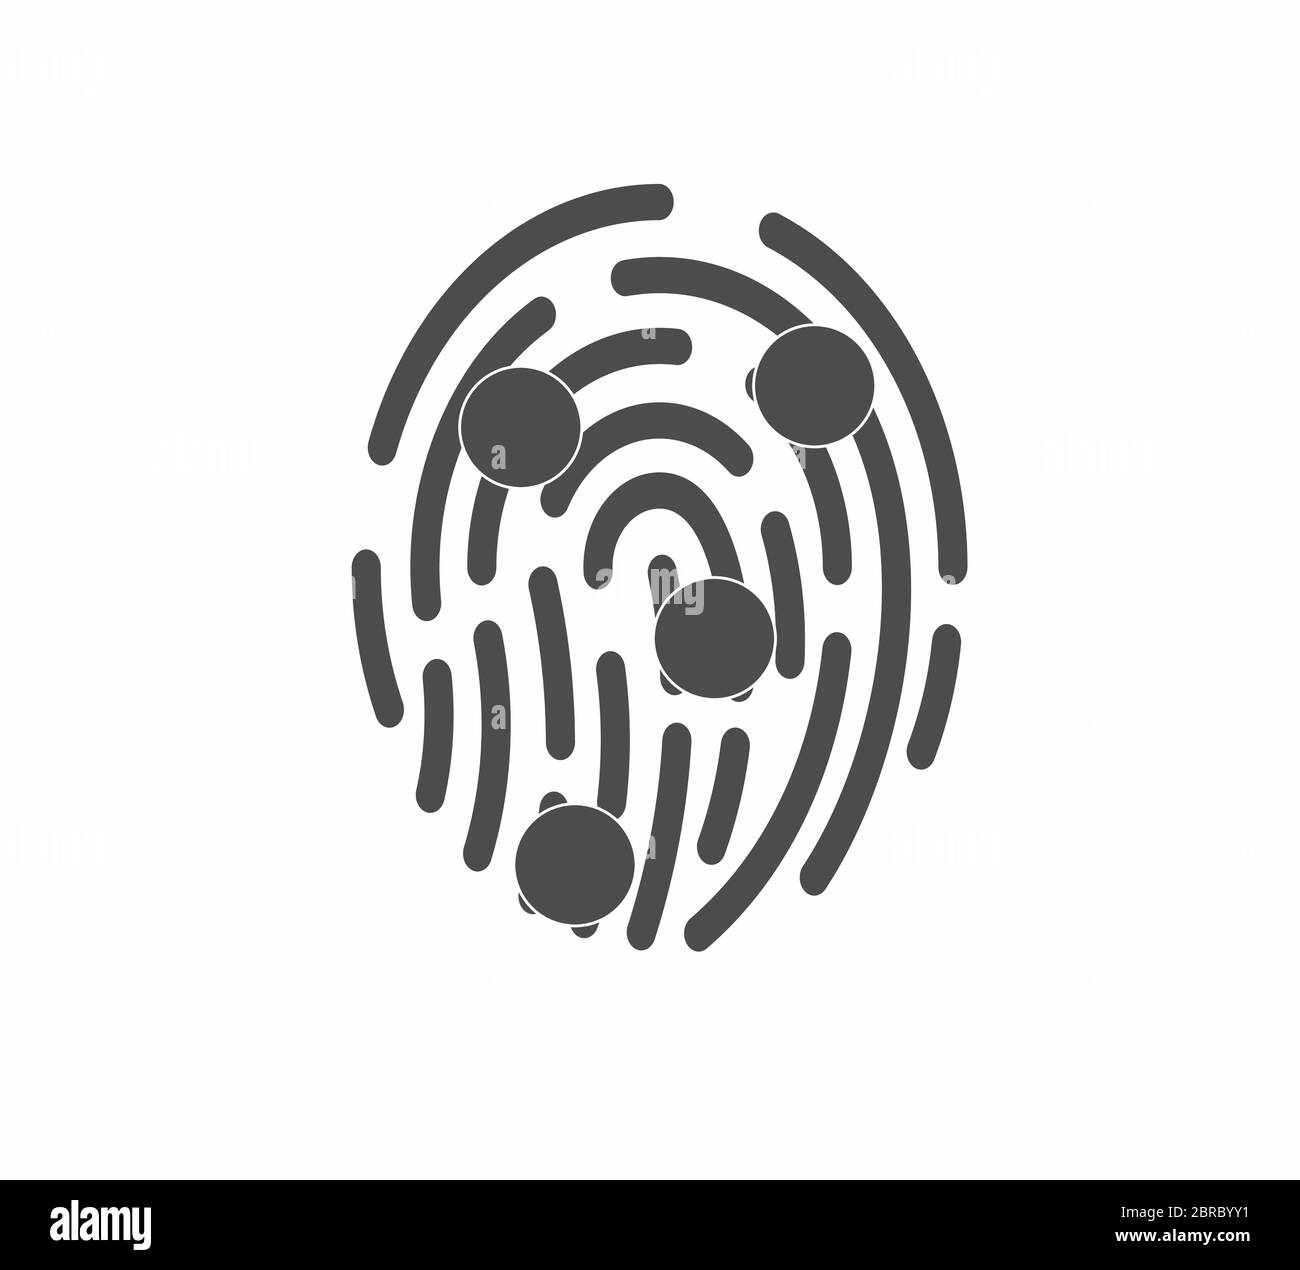 Fingerprint identification and recognition. Data security Stock Vector